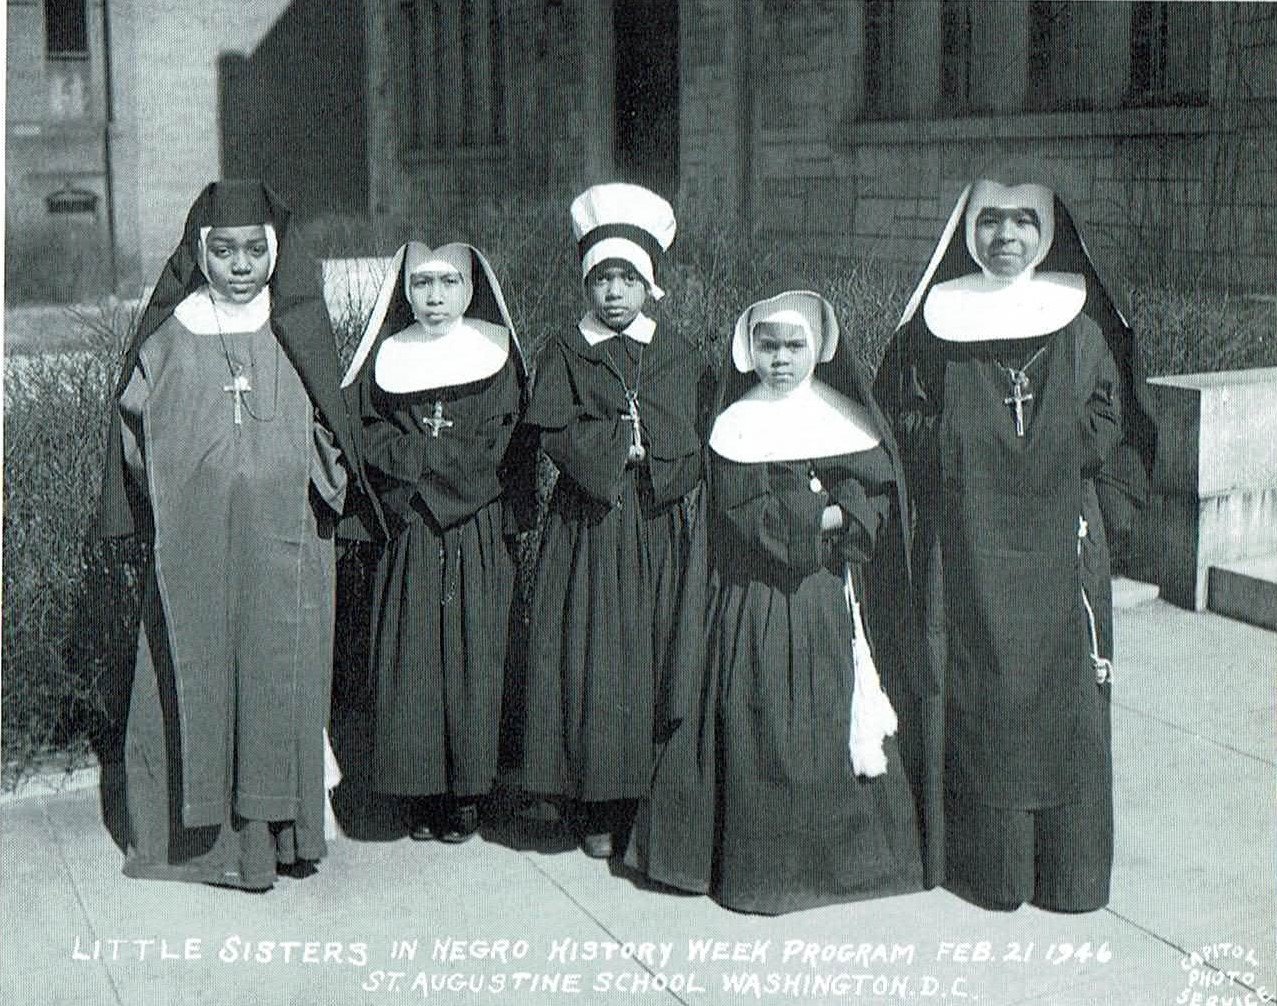 In this Feb. 21, 1946, file photo, students at St. Augustine School in Washington, led by the Oblate Sisters of Providence, participate in Negro History Week; the precursor to Black History Month, observed each February.